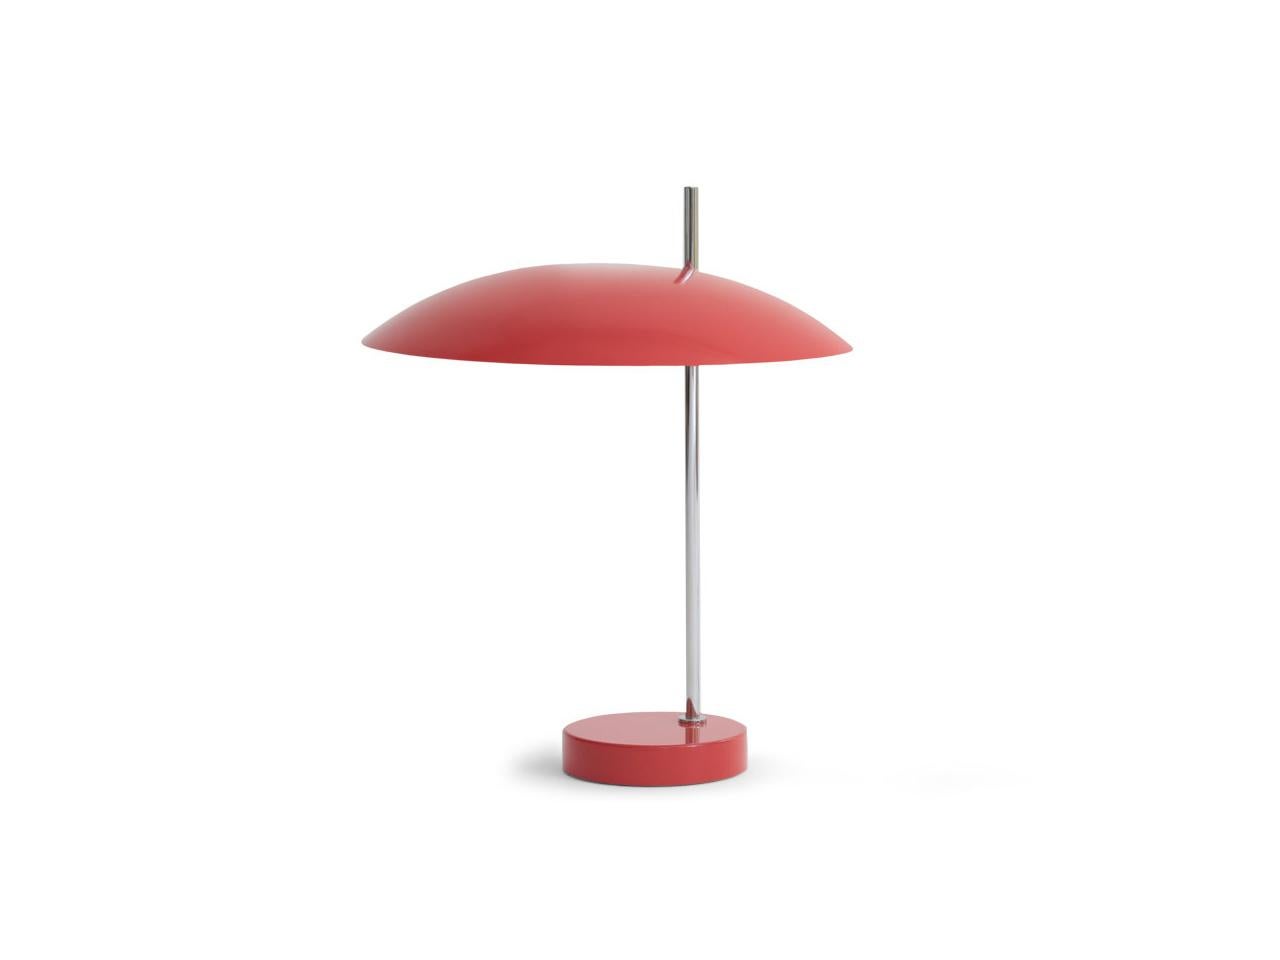 This lighting fixture was originally conceived as a desk lamp, with its' ideal height and even lighting to avoid eye fatigue. Its' elegant design and size made it an iconic object to place anywhere: In the bedroom, on furniture in the sitting room,